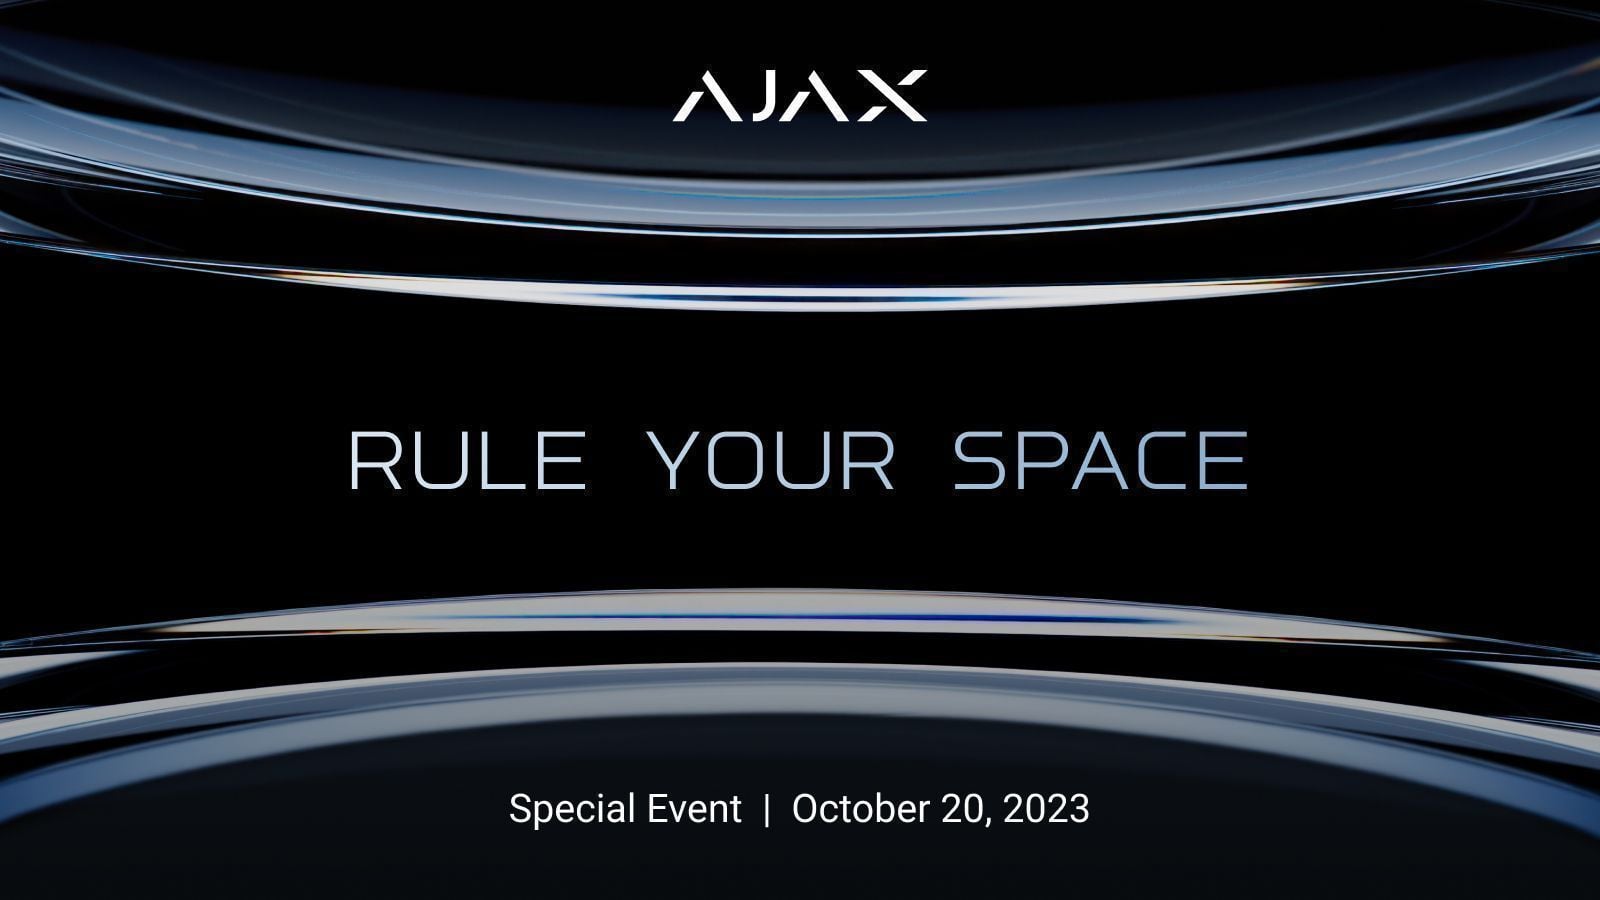 Get Ready for the Next Big Things in Security –  Ajax Special Event: Rule Your Space is Coming October 20